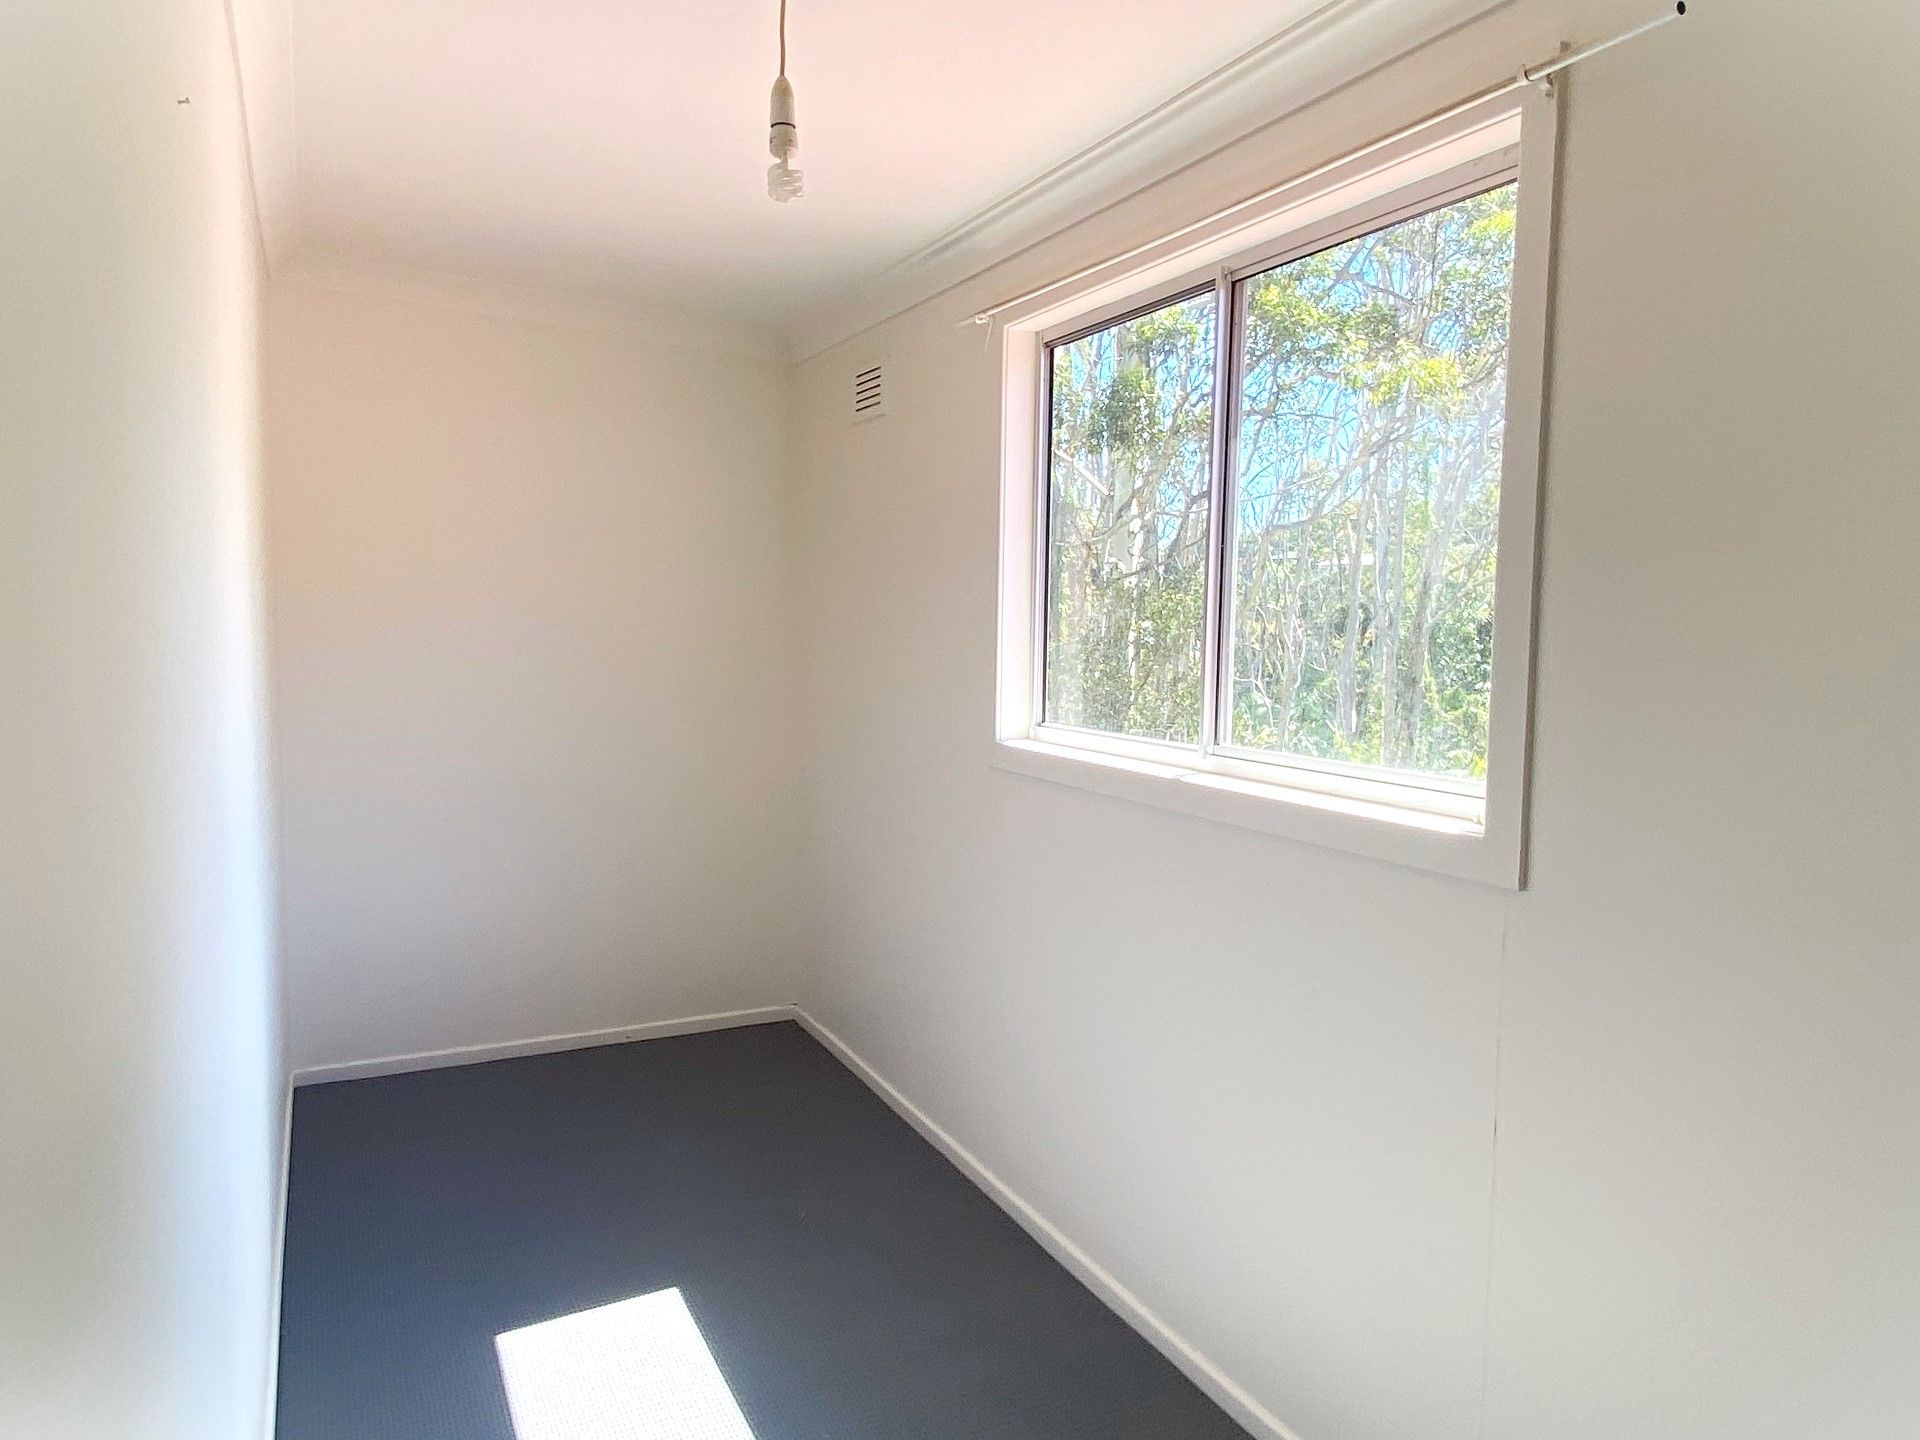 Nambucca Heads Real Estate: Centrally located